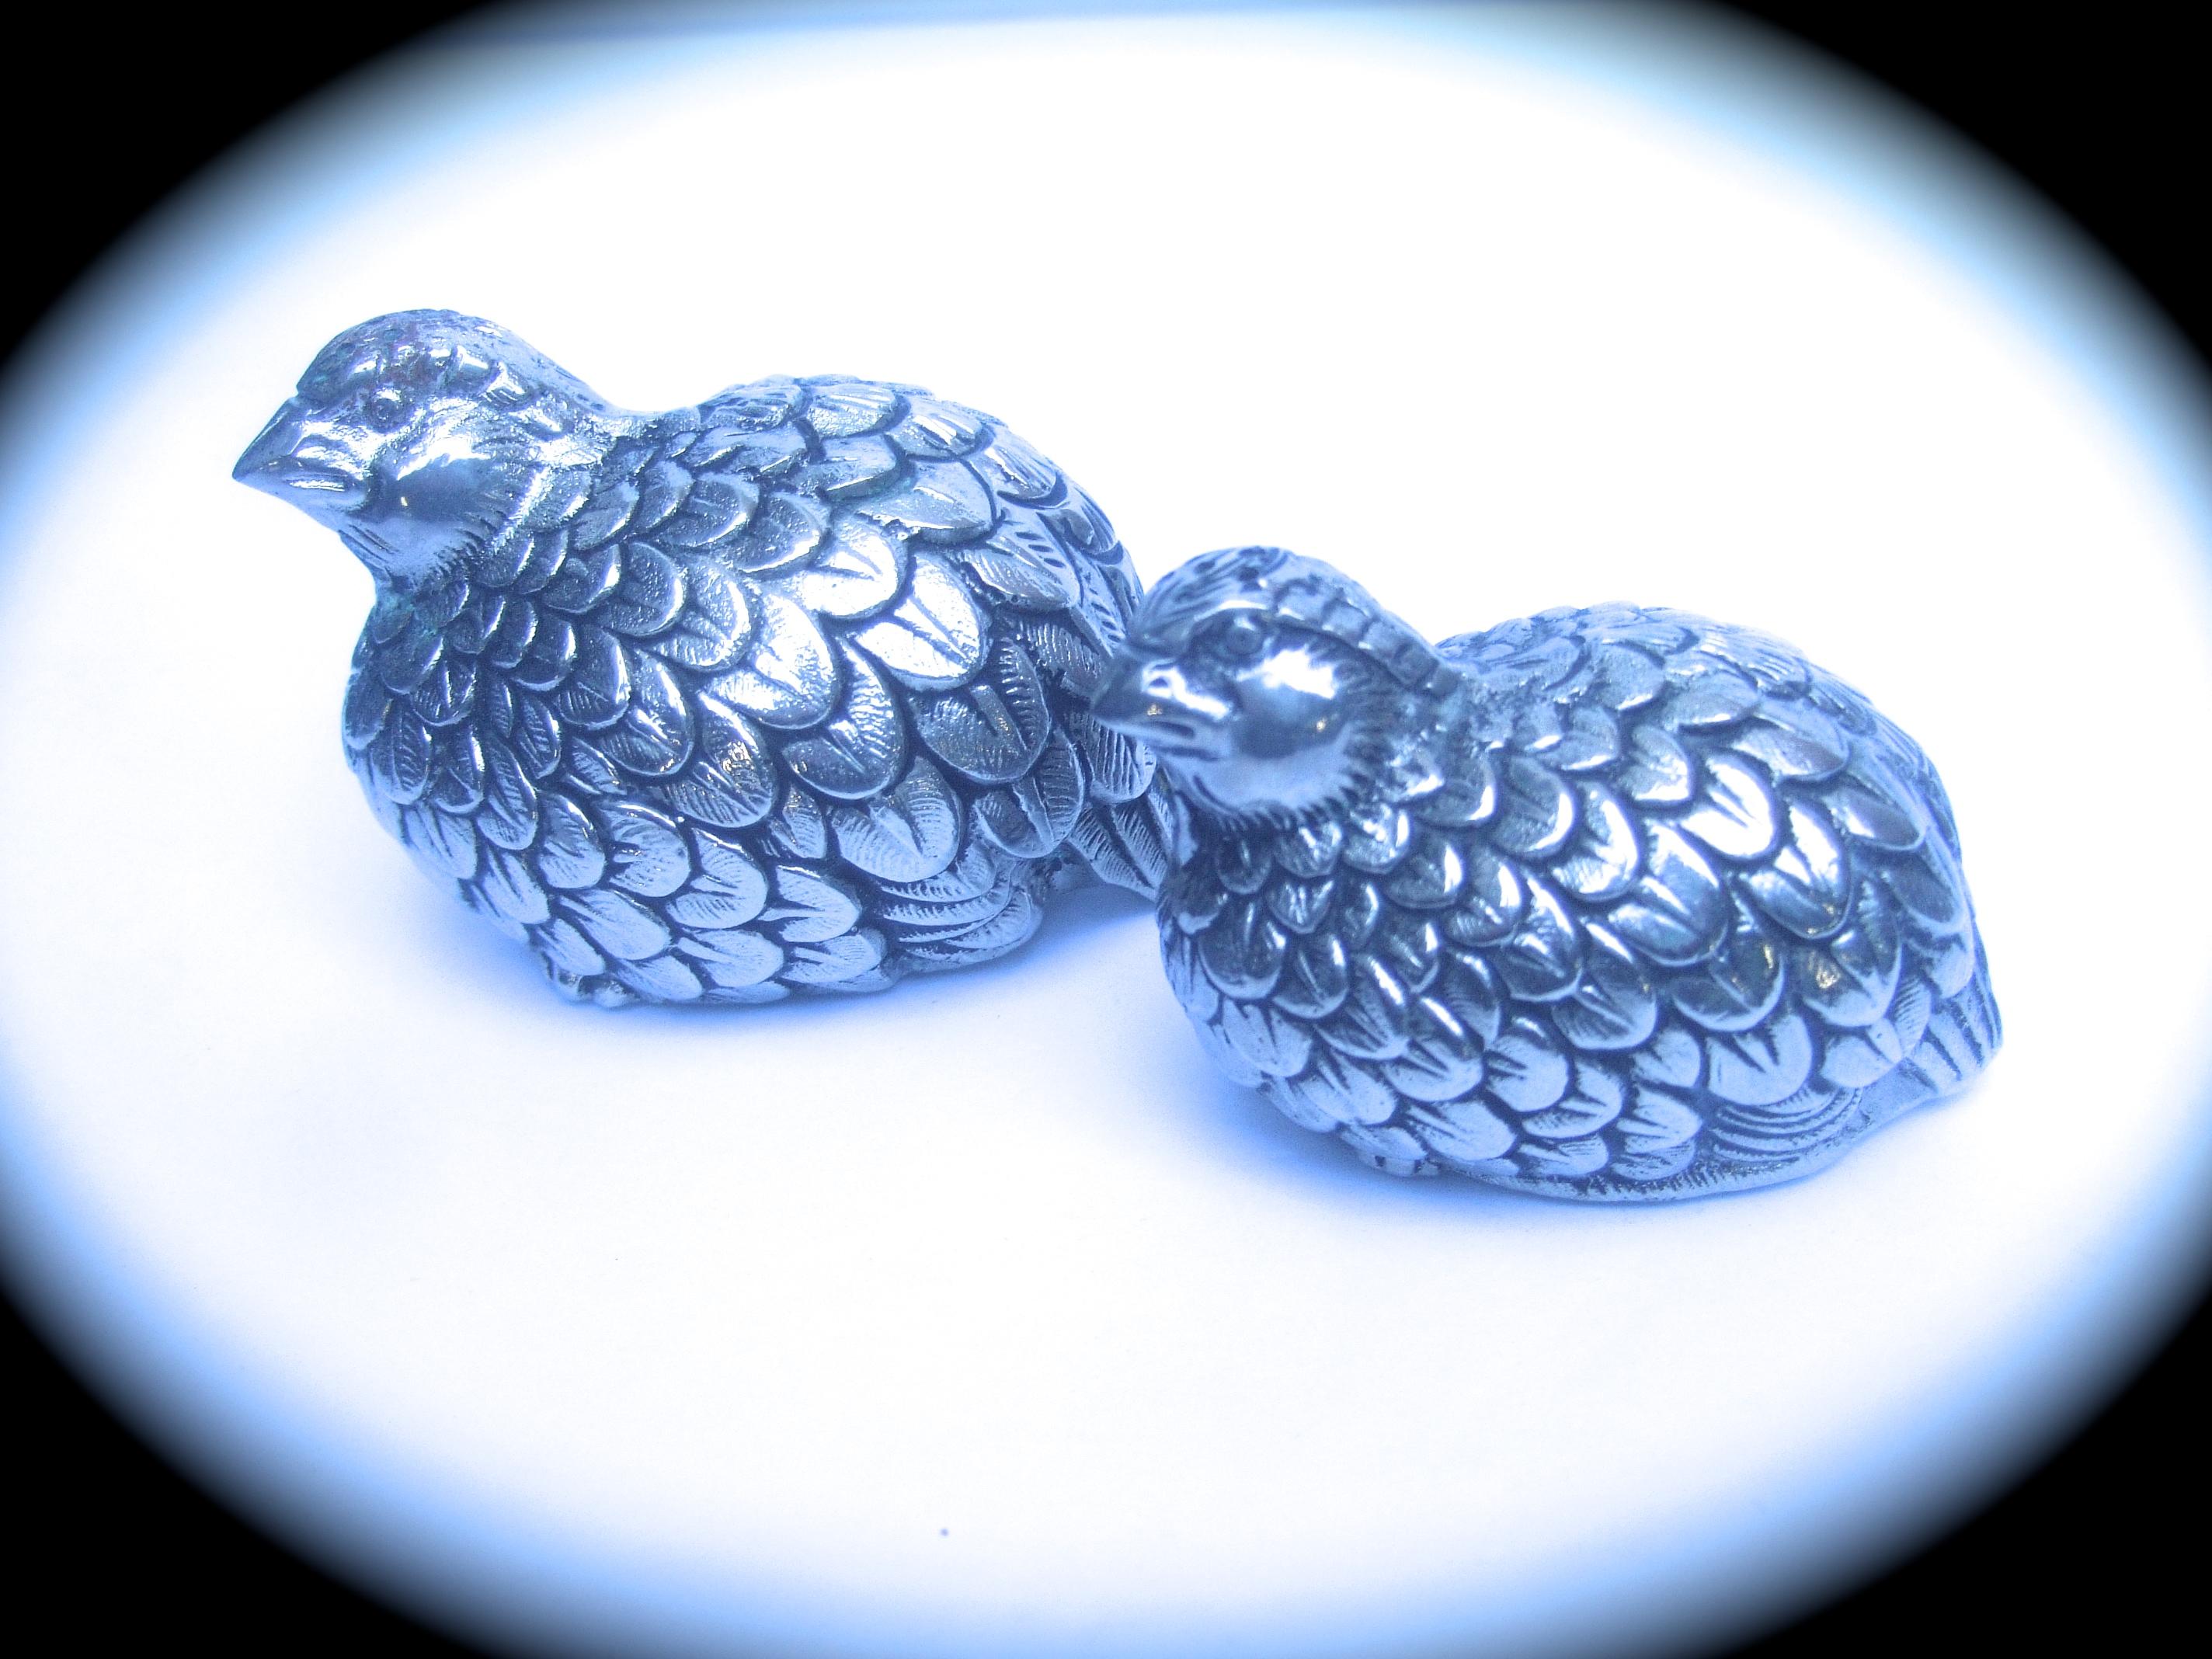 Gucci Pair of Silver Metal Stylized Quail Salt & Pepper Shakers c 1970s 3